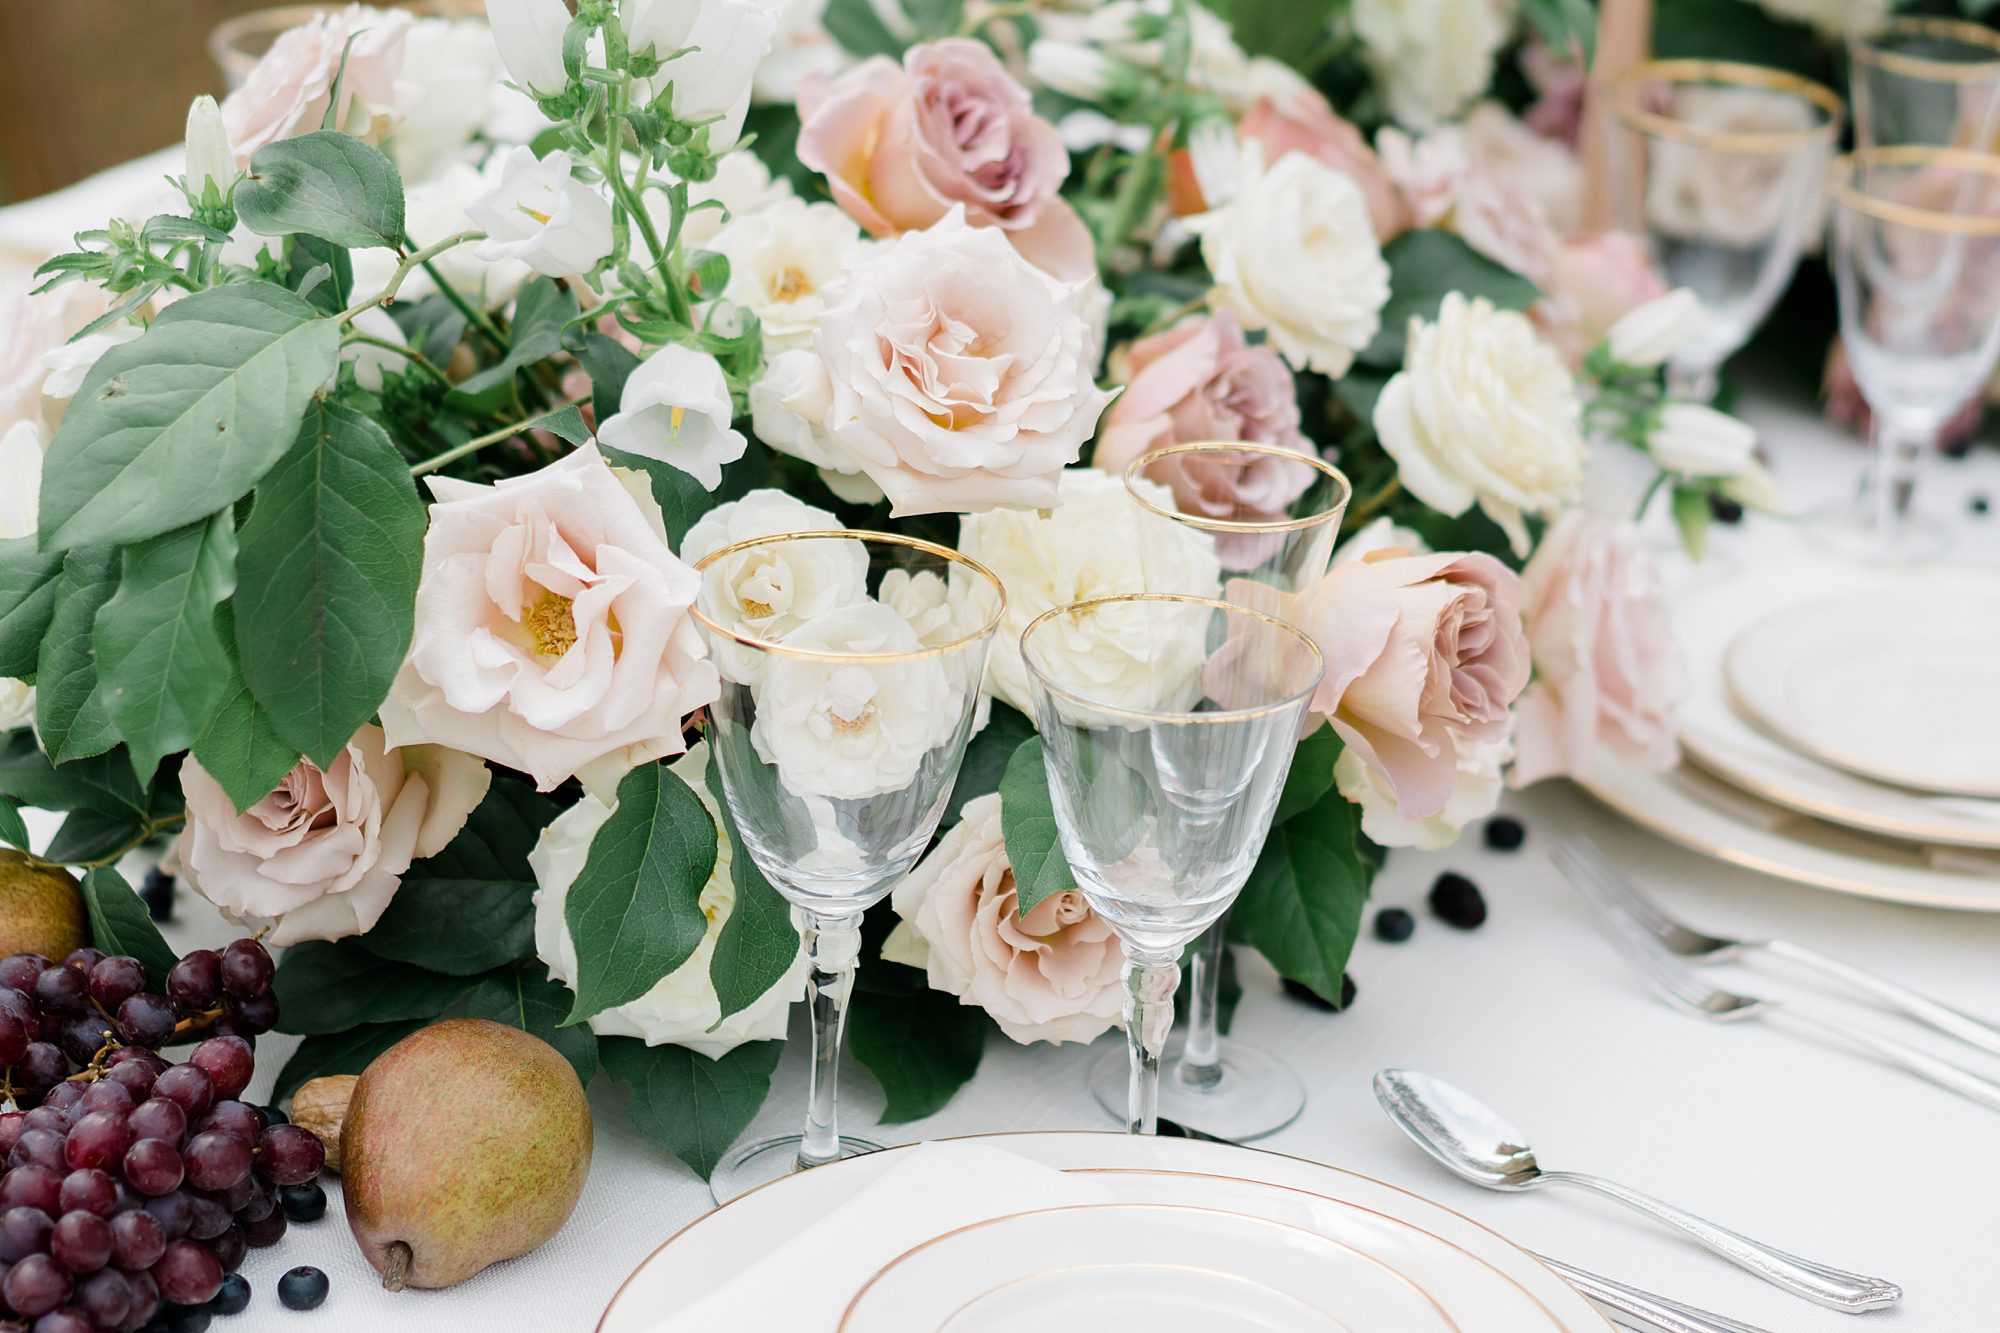 wedding tablescapes from styled wedding shoot at Salubria